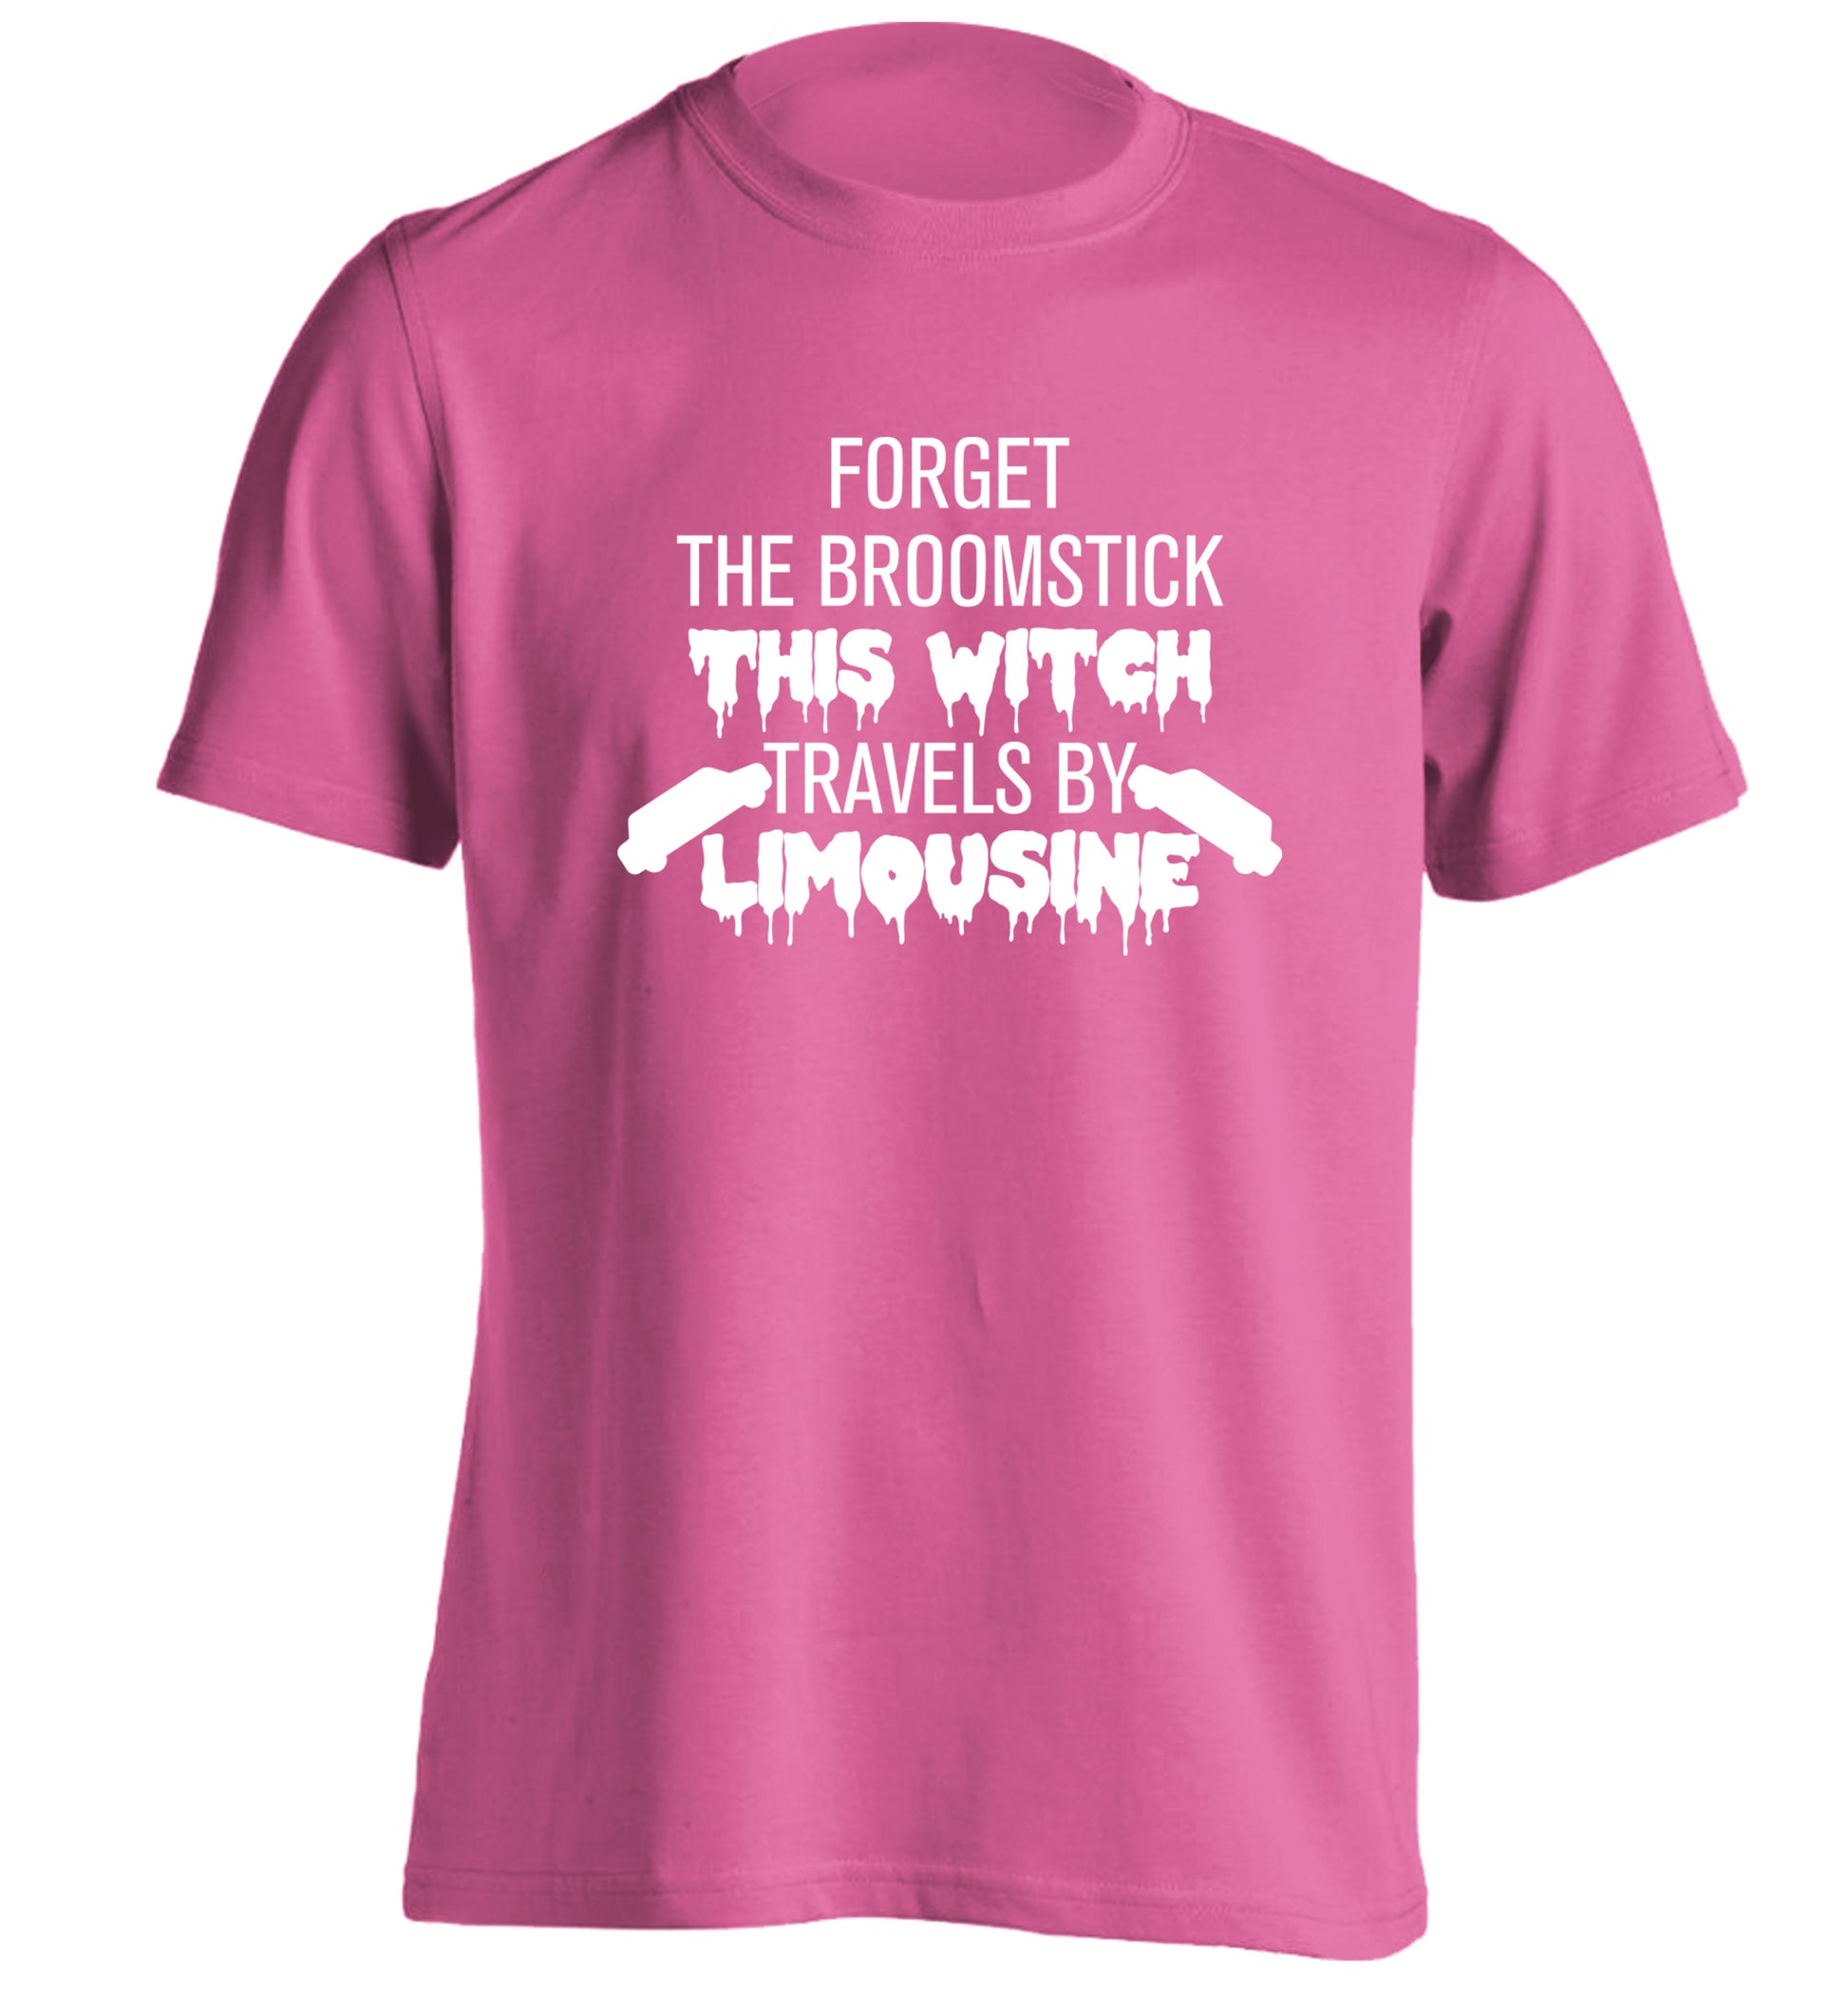 Forget the broomstick this witch travels by limousine adults unisexpink Tshirt 2XL